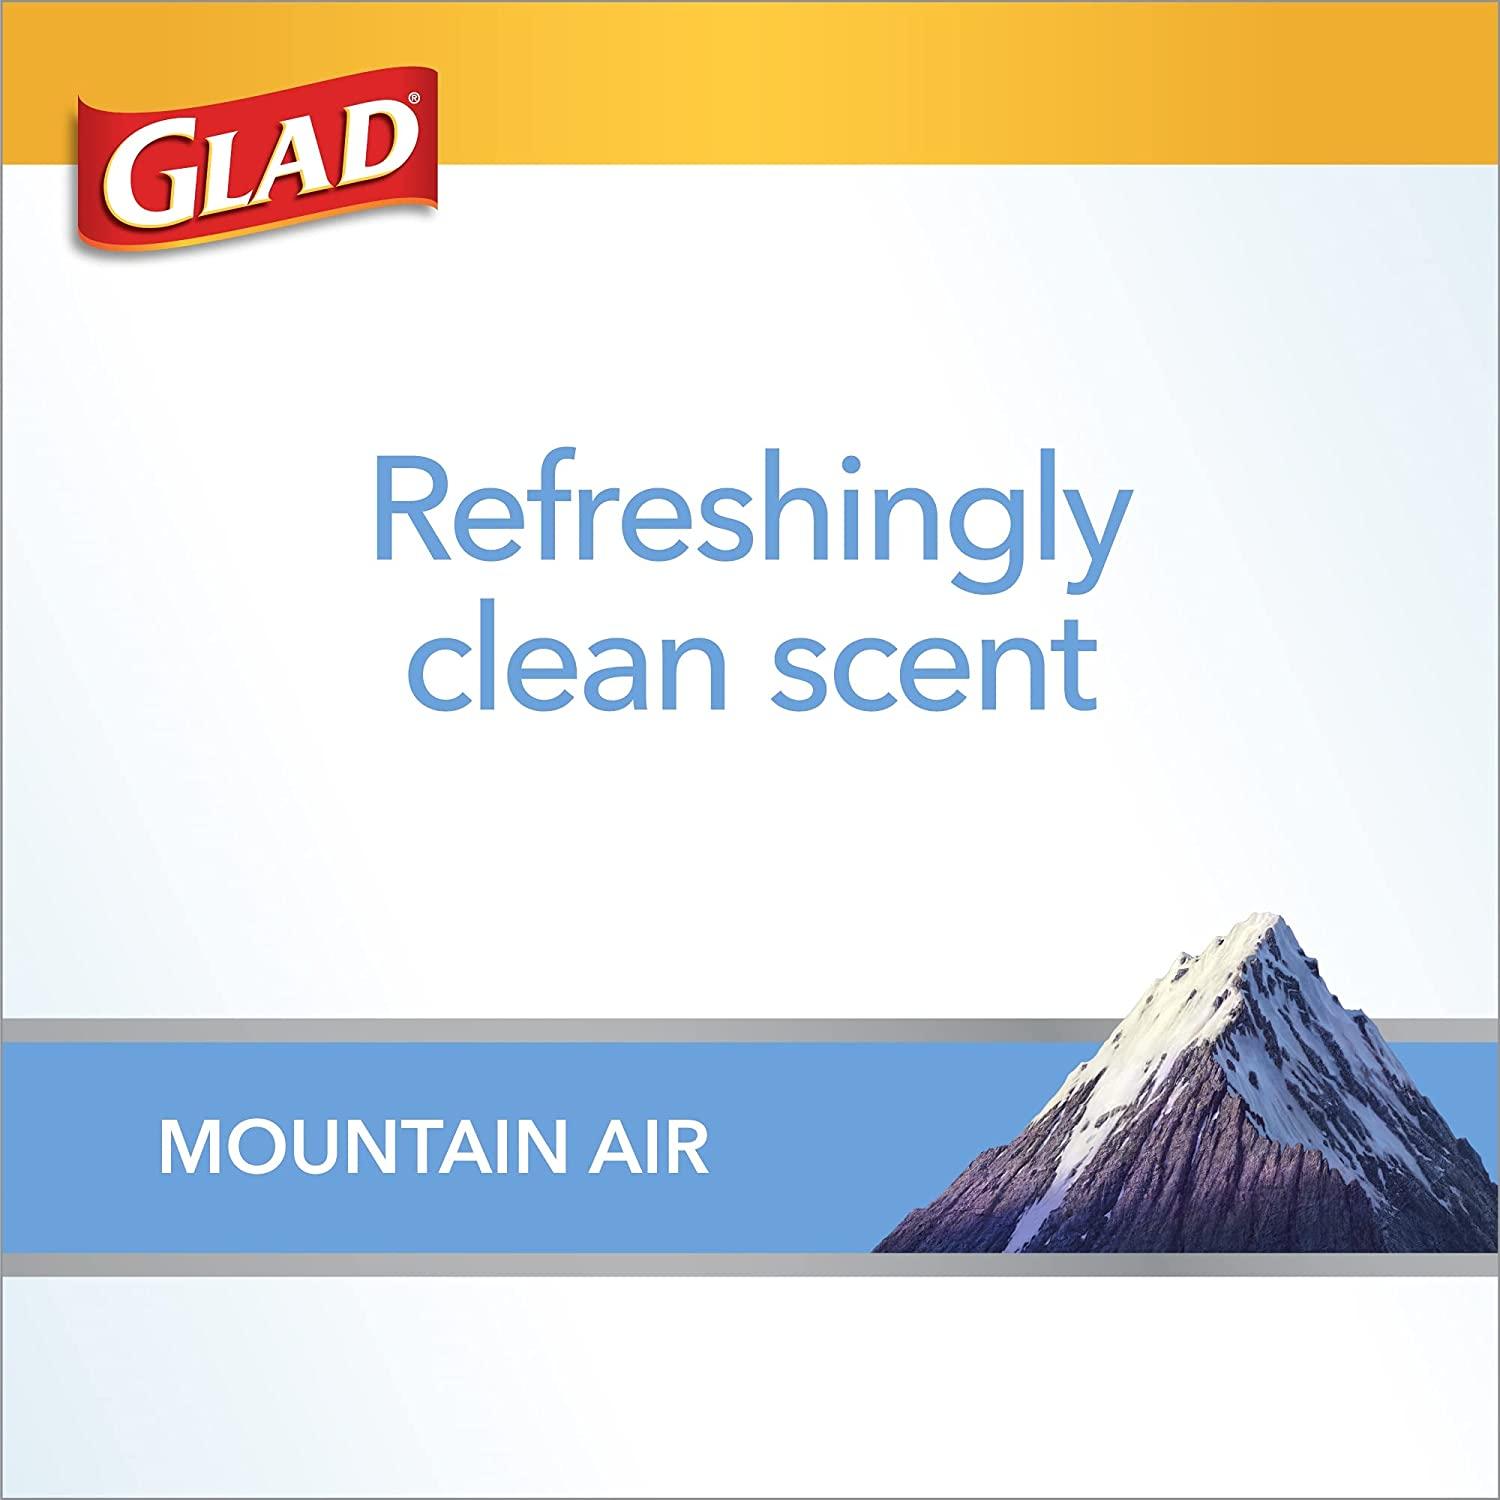 Glad ForceFlex with Clorox Mountain Air Scent Large Drawstring